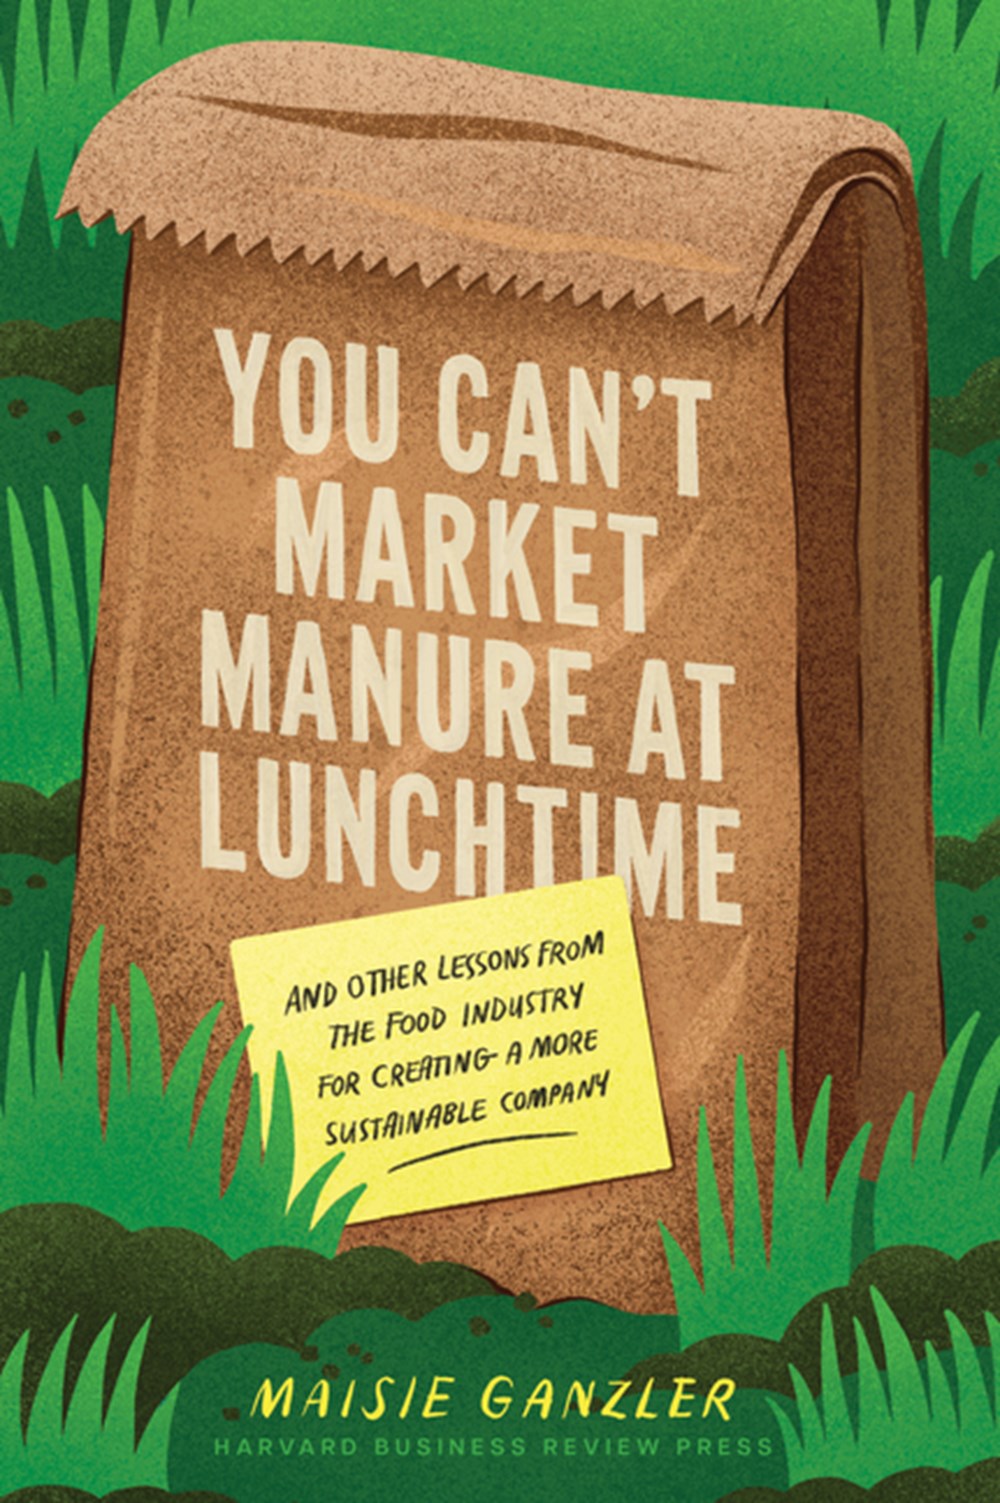 You Can't Market Manure at Lunchtime: And Other Lessons from the Food Industry for Creating a More S